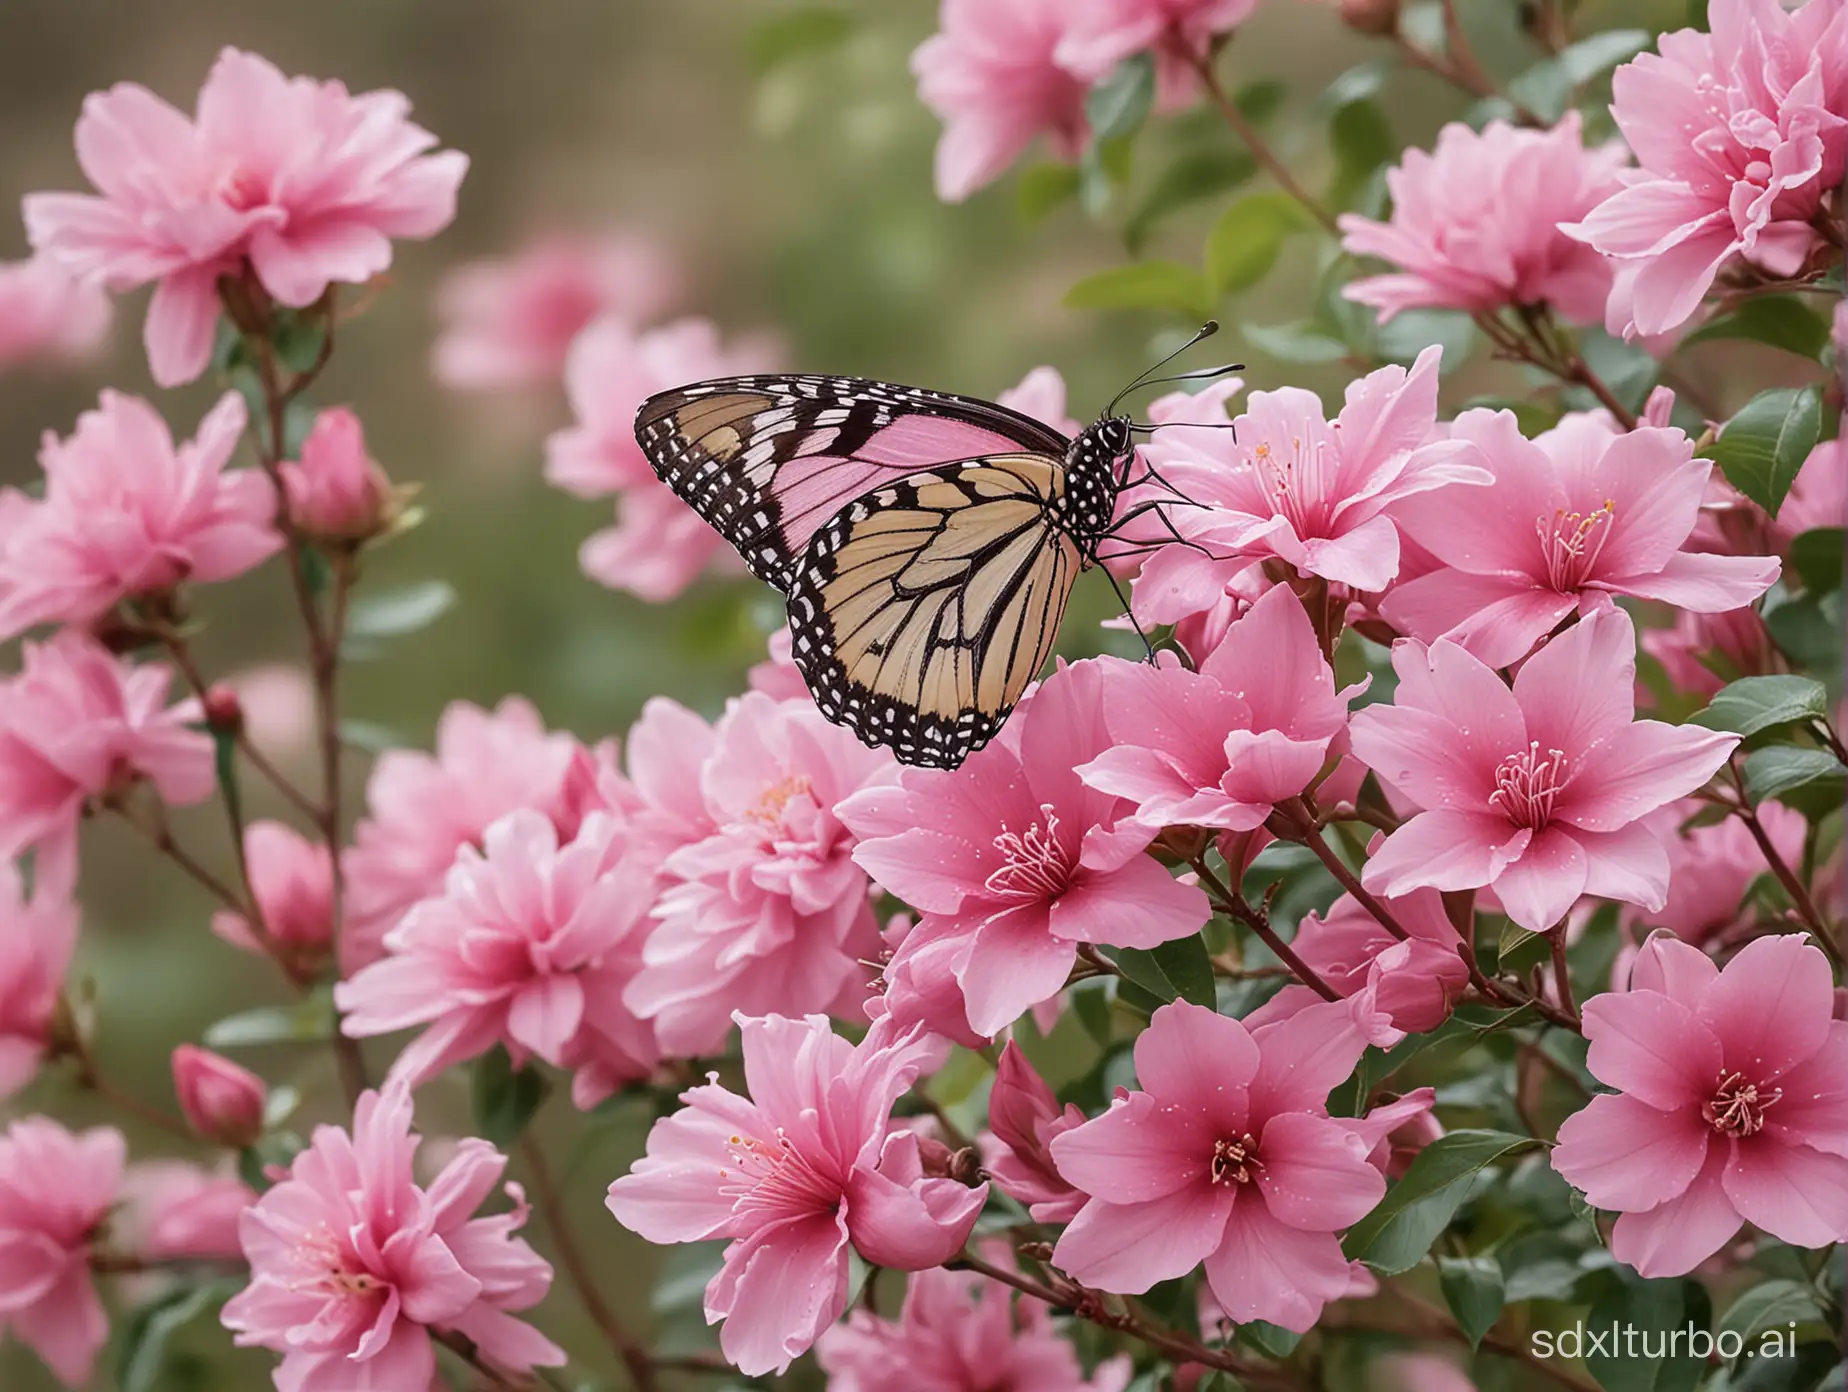 Pink petals flutter,
Seasons weave their timeless song,
Nature's strength now born again.